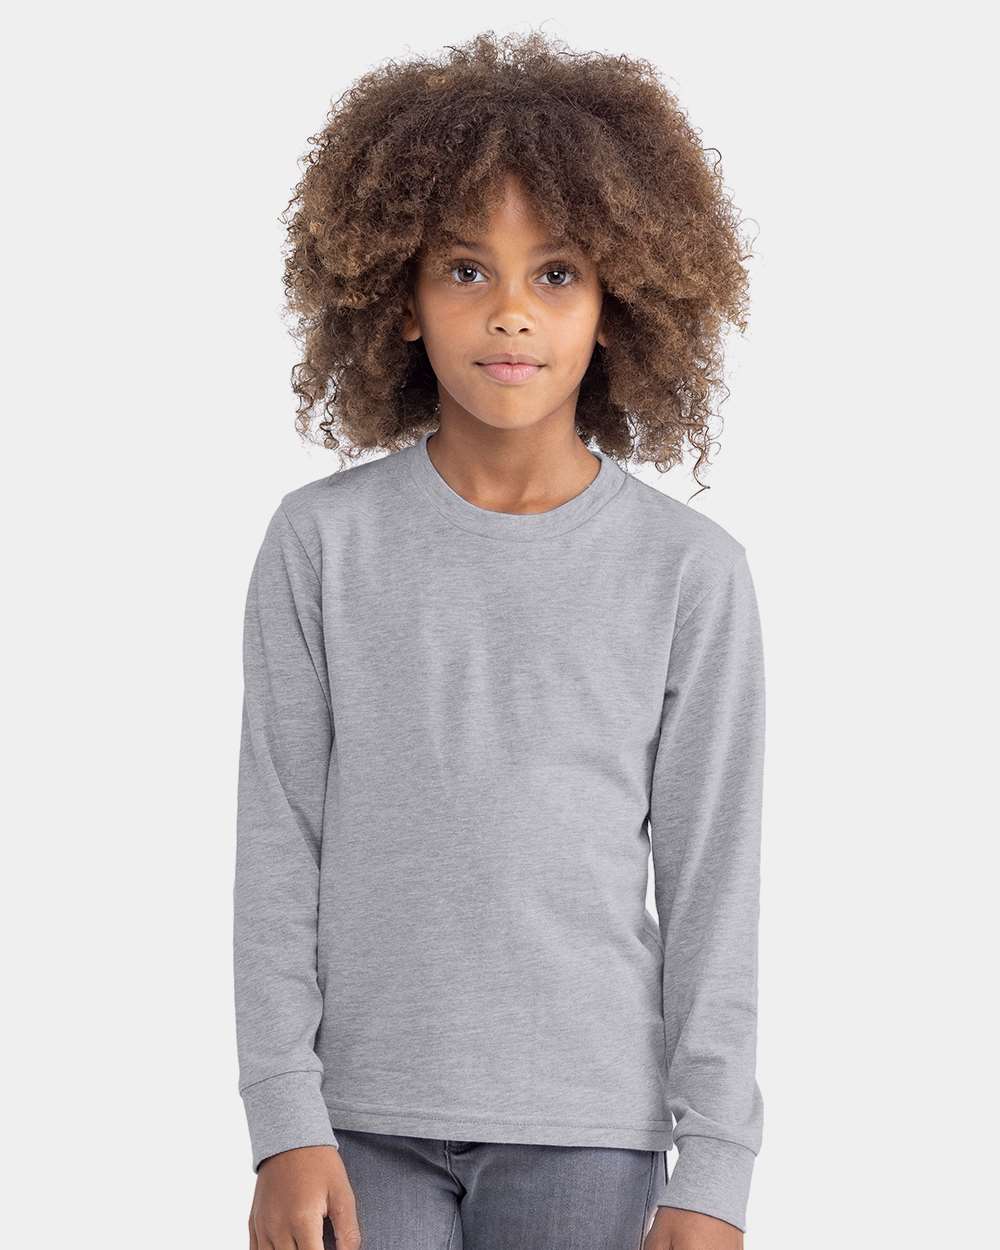 Ultimate Comfort - Youth Cotton Long Sleeve T-Shirt | Crafted with 100% Combed Cotton Jersey (4.3 oz.) - 32 Singles for Extra Softness | Elevate youth&#x27;s fashion journey with the perfect blend of softness and sophistication | RADYAN&#xAE;